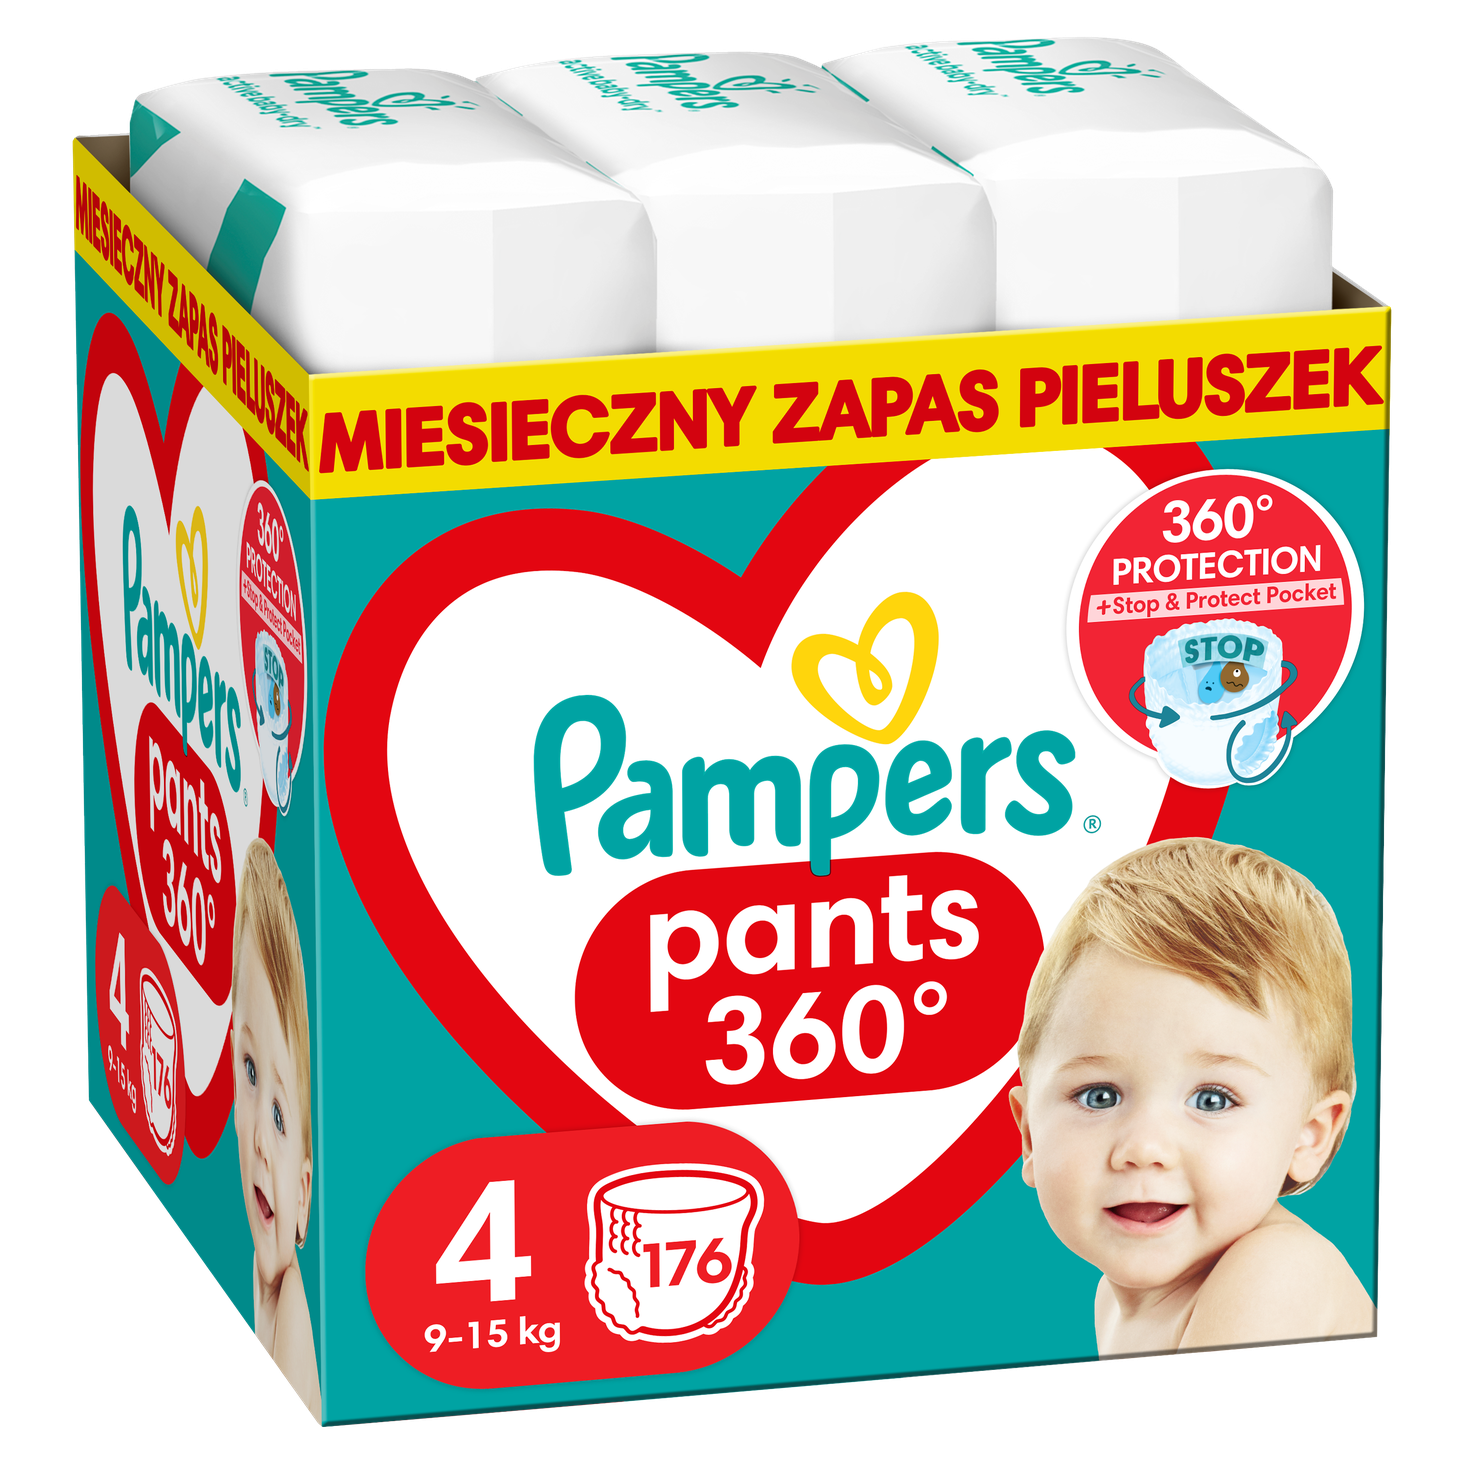 pampers 104